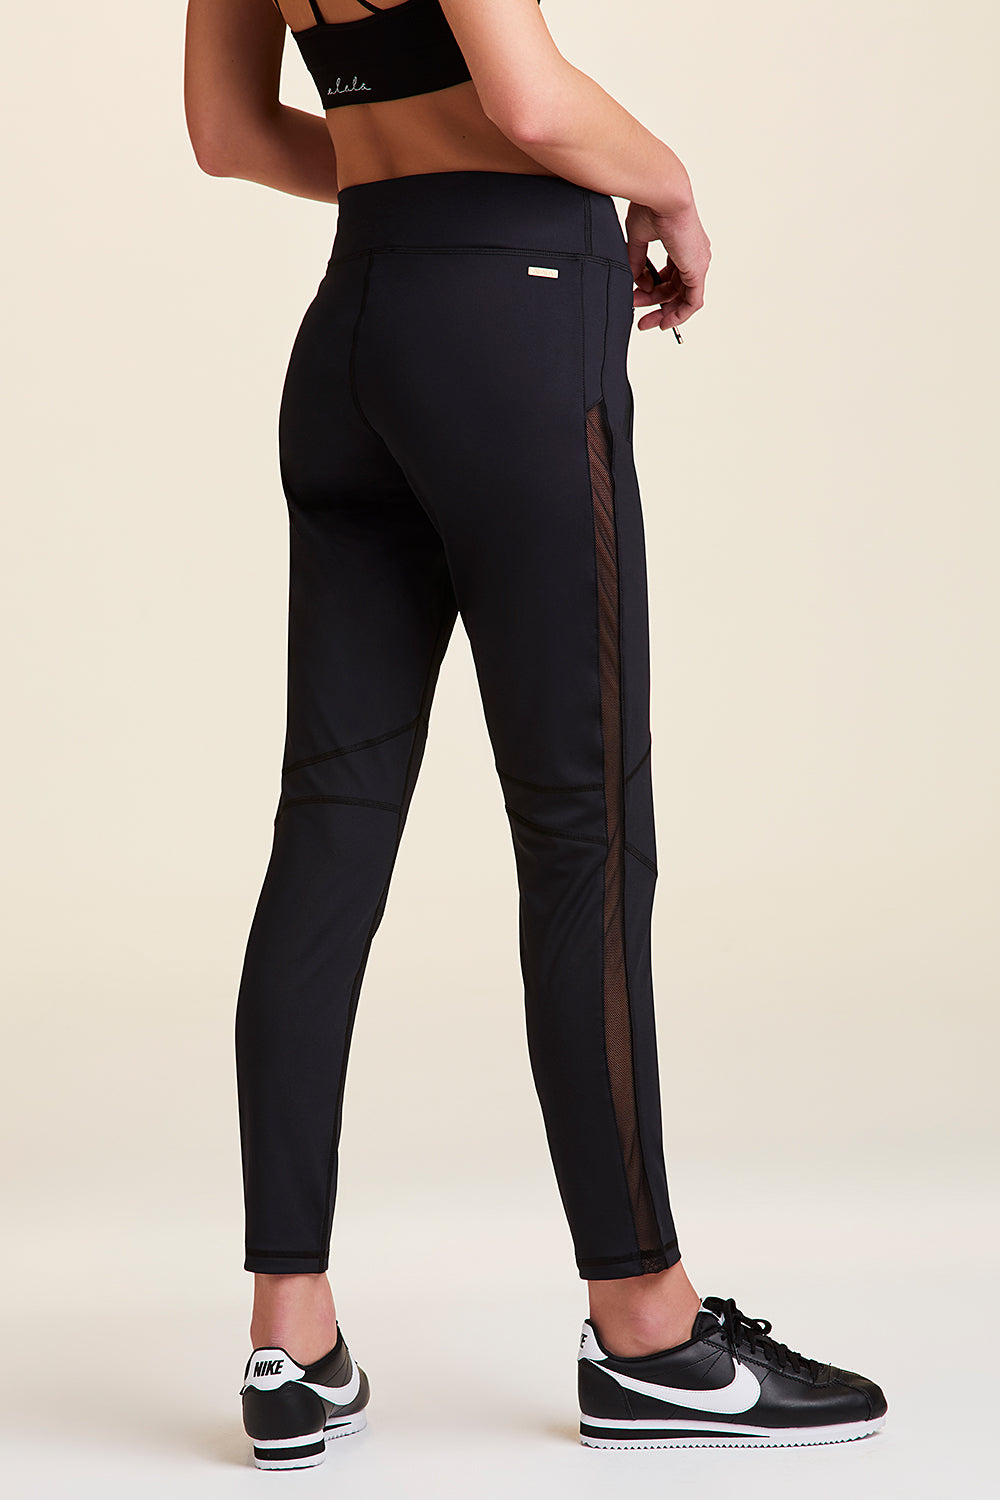 3/4 back view of Alala Women's Luxury Athleisure black sweatpant with sheer mesh side panel